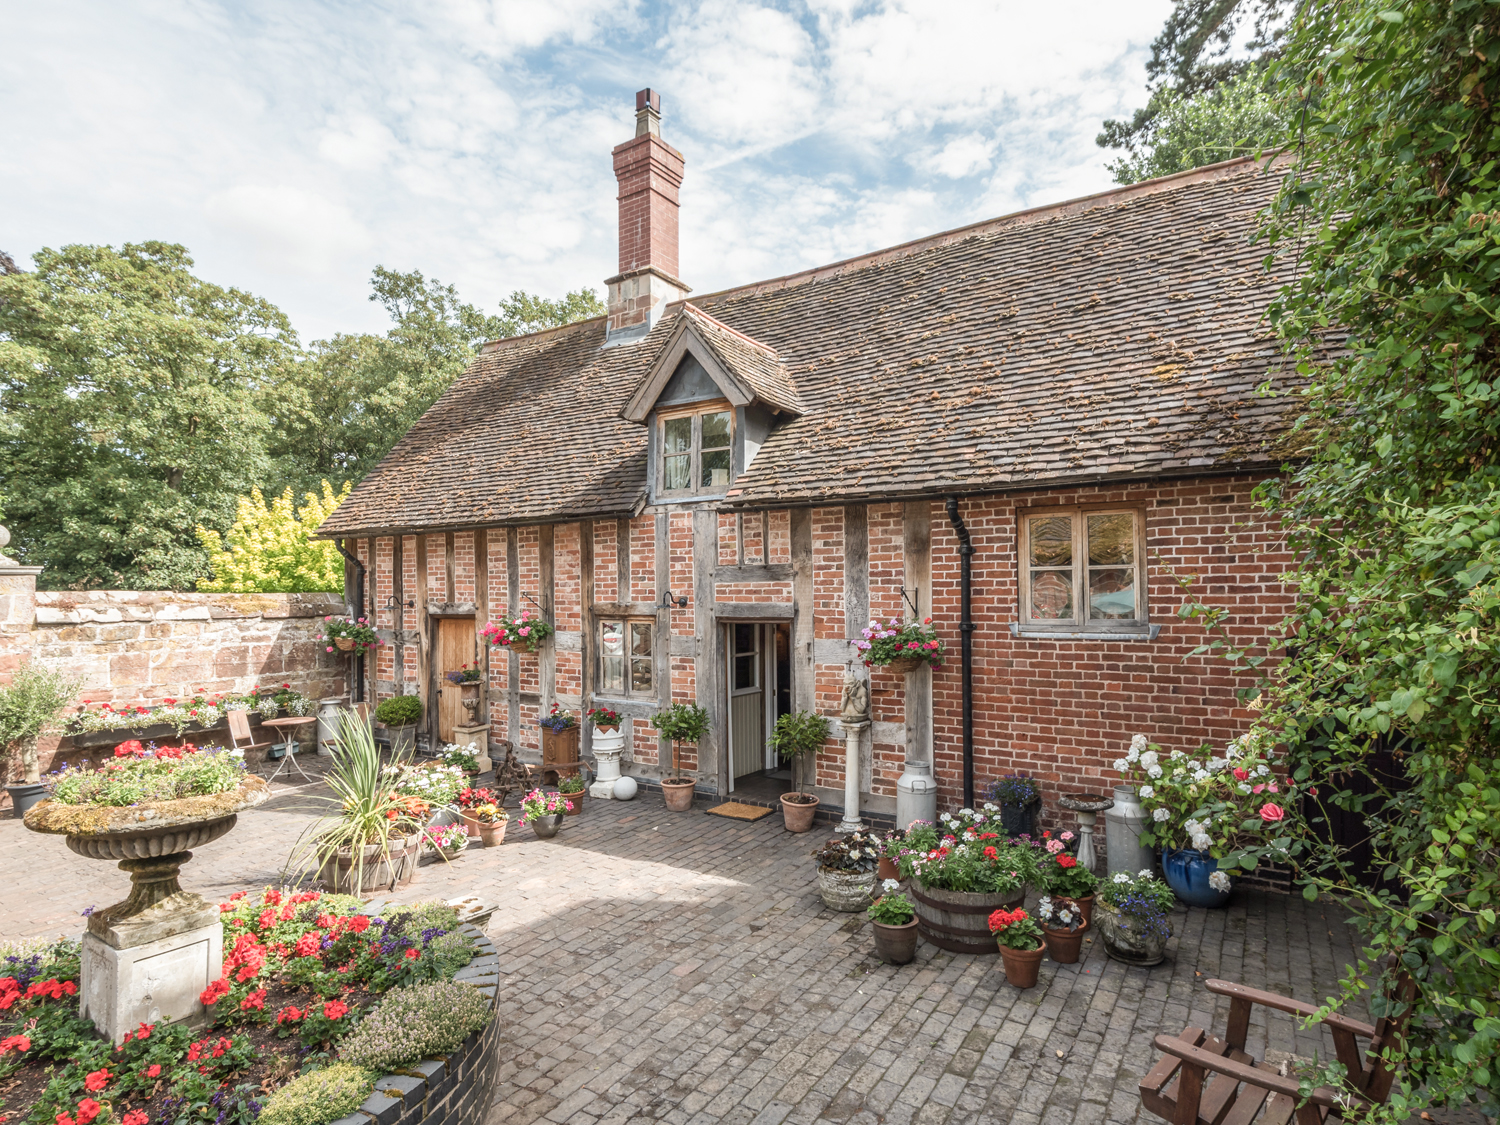 Courtyard Cottage, Heart of England